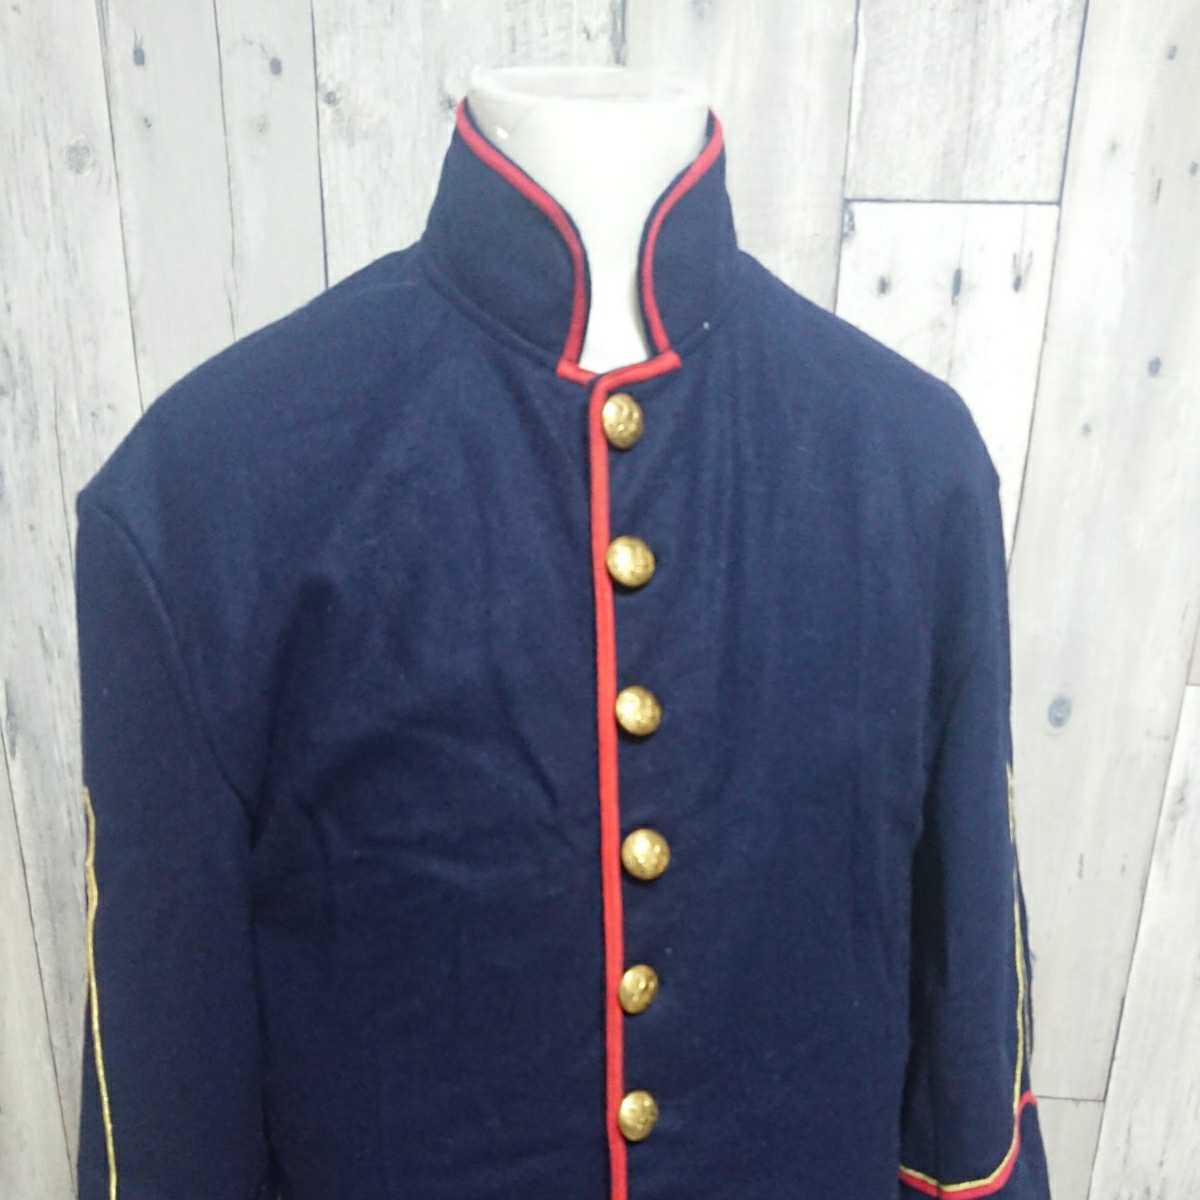 .. war curtain prefecture land army Meiji land army France type ... military uniform curtain end Meiji the first period military uniform 